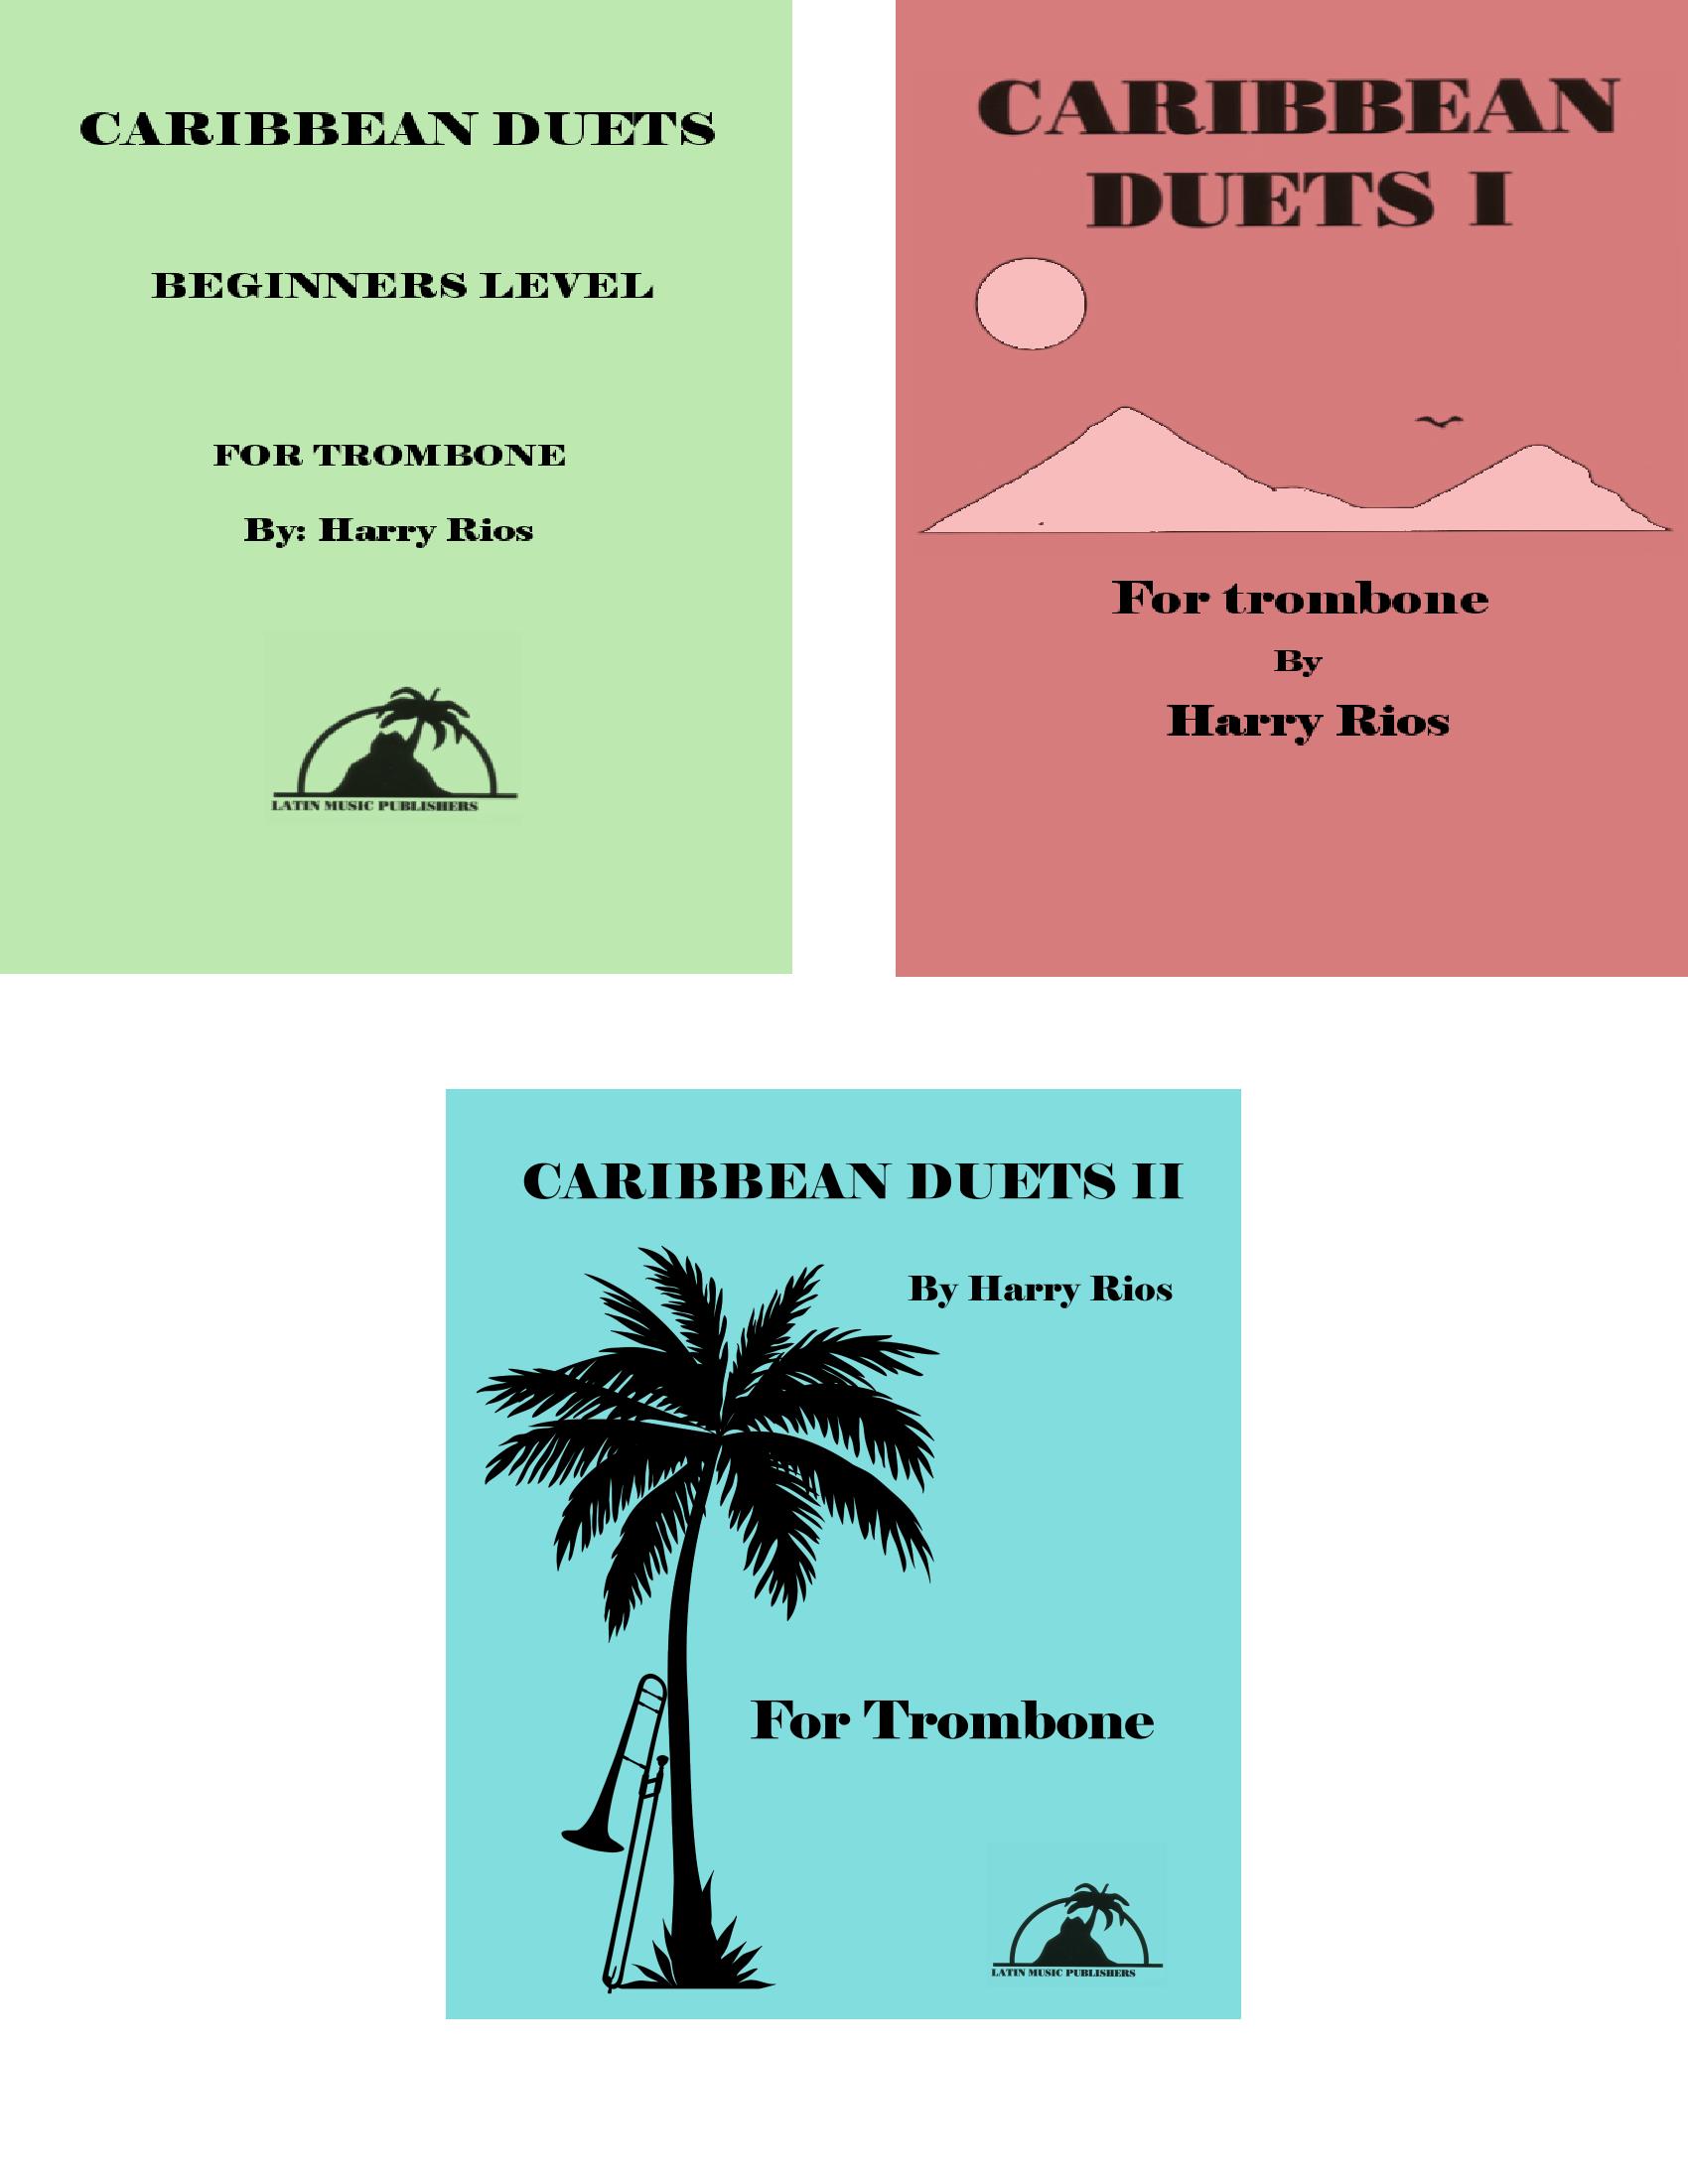 Click to download "Caribbean Duets Catalog" sheet music, page 1